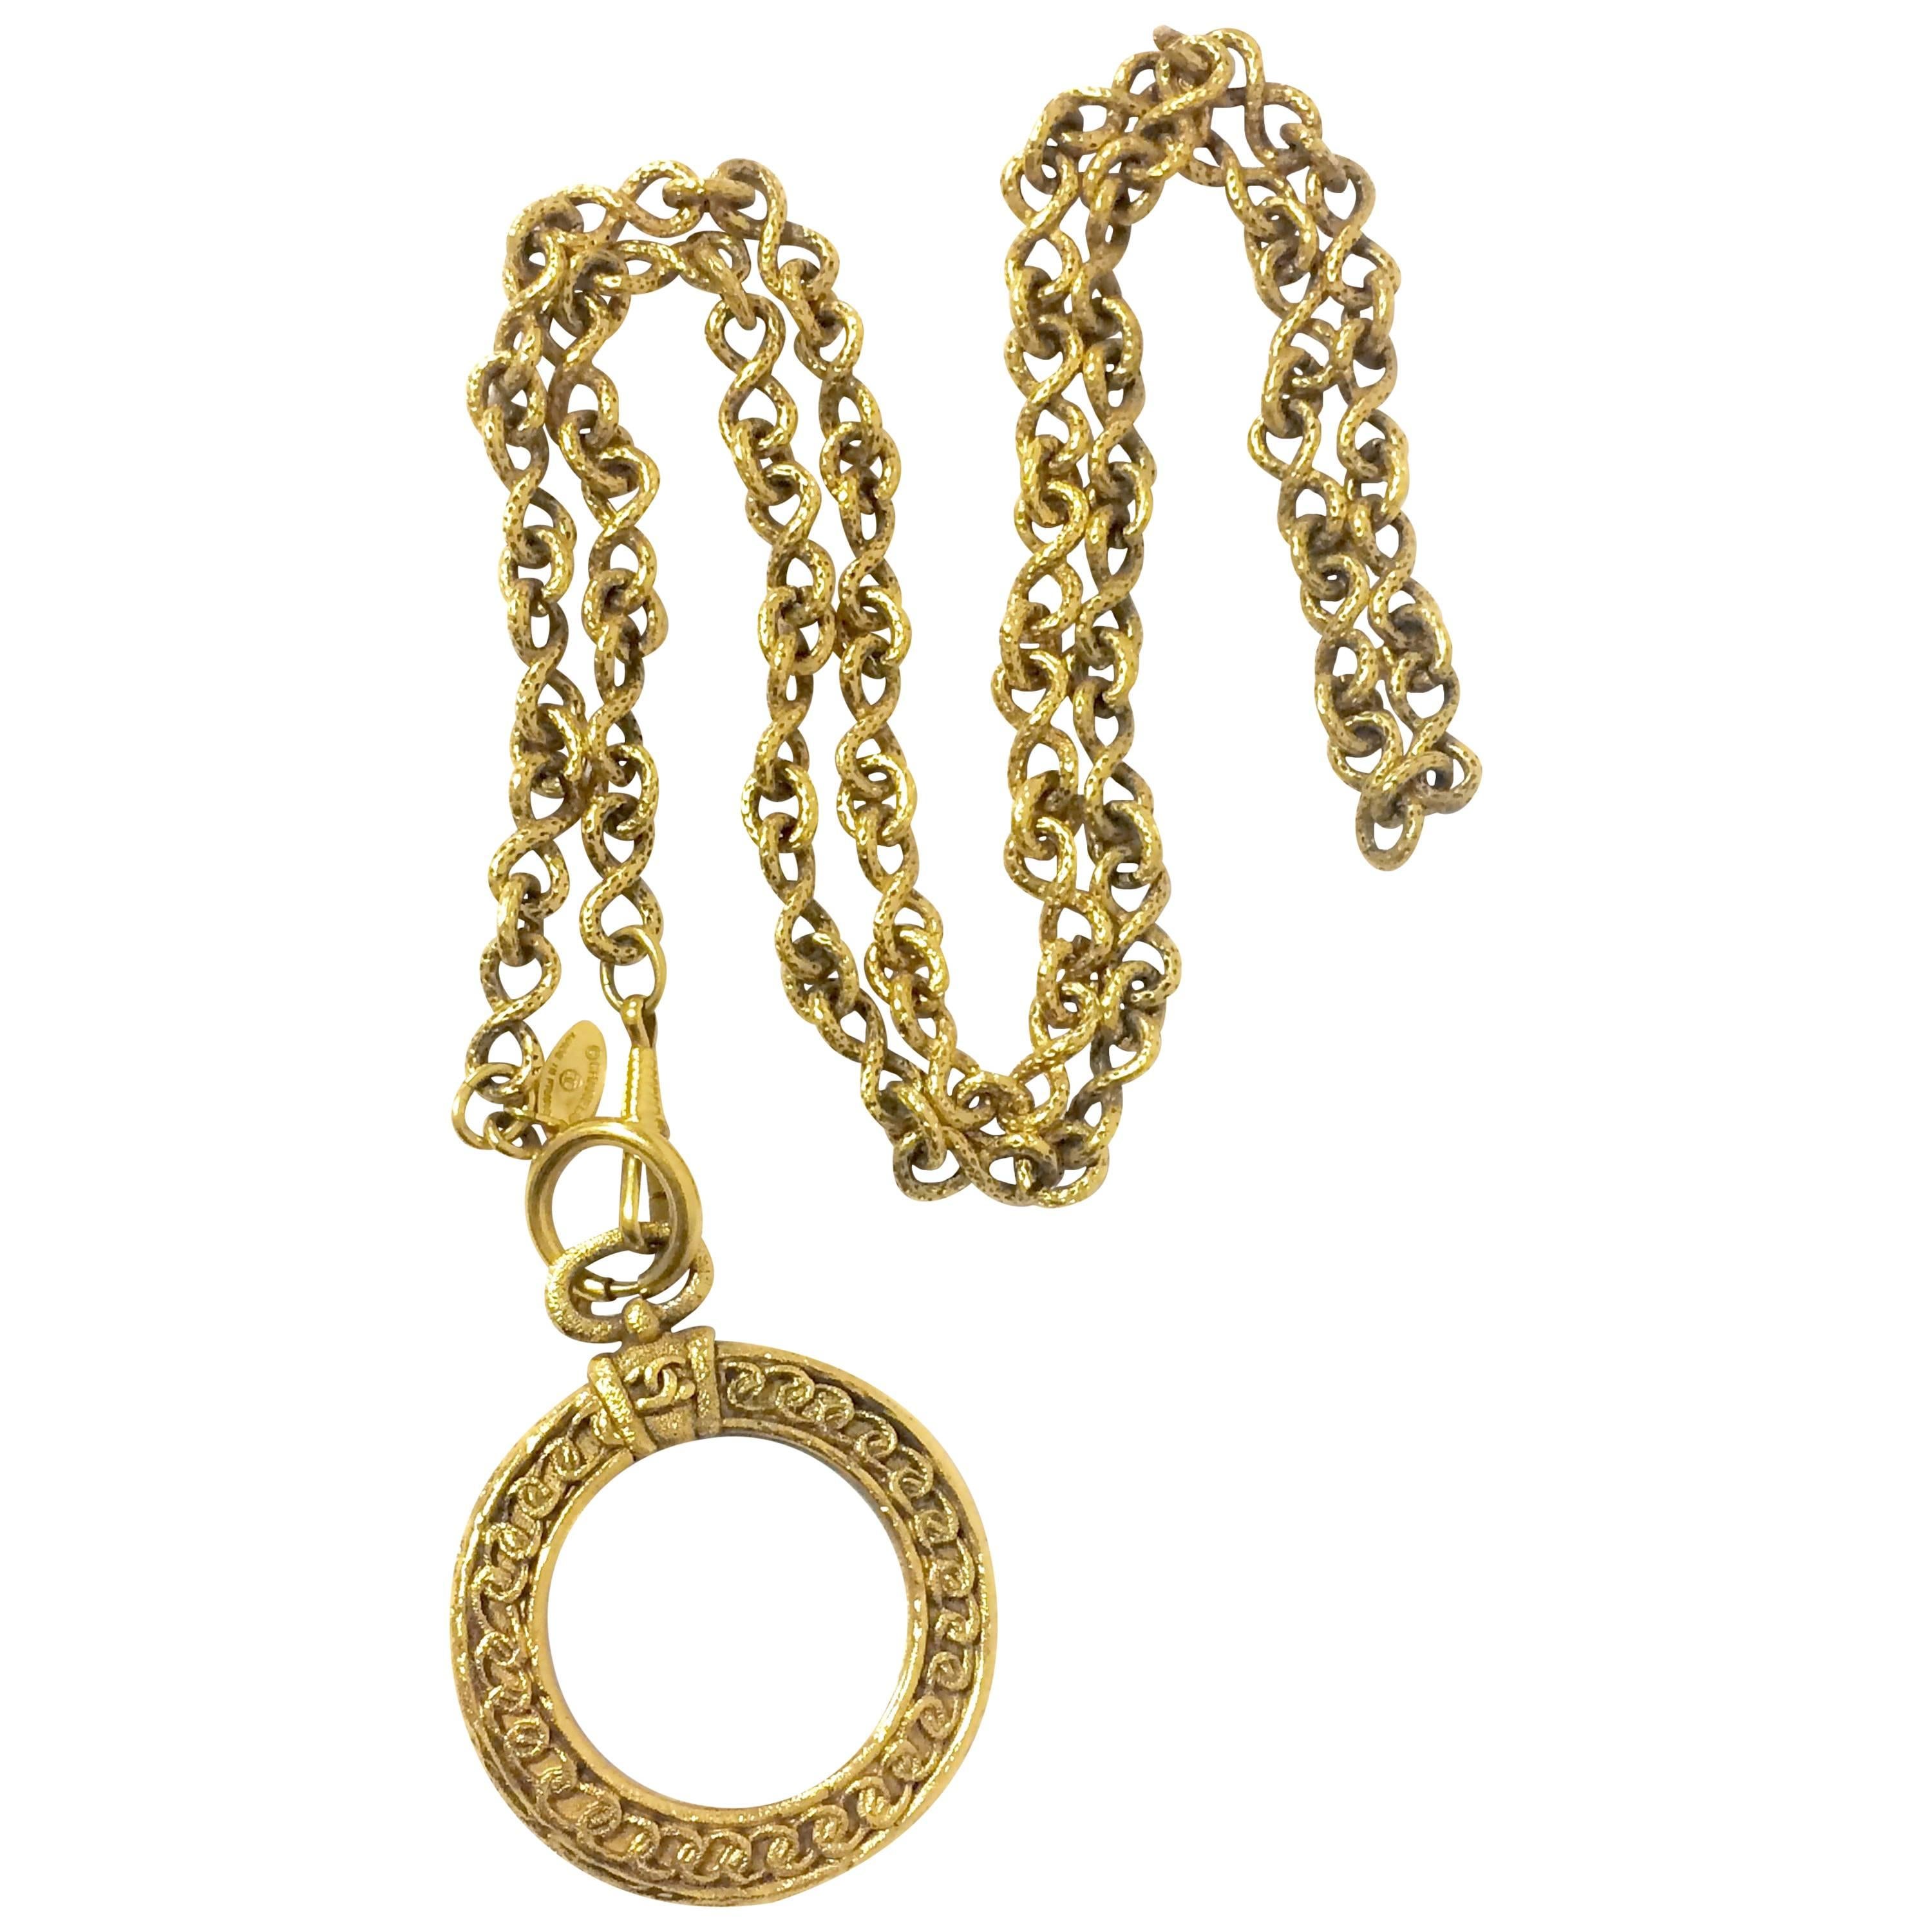 Vintage CHANEL long chain necklace with round glass loupe pendant top and CC.